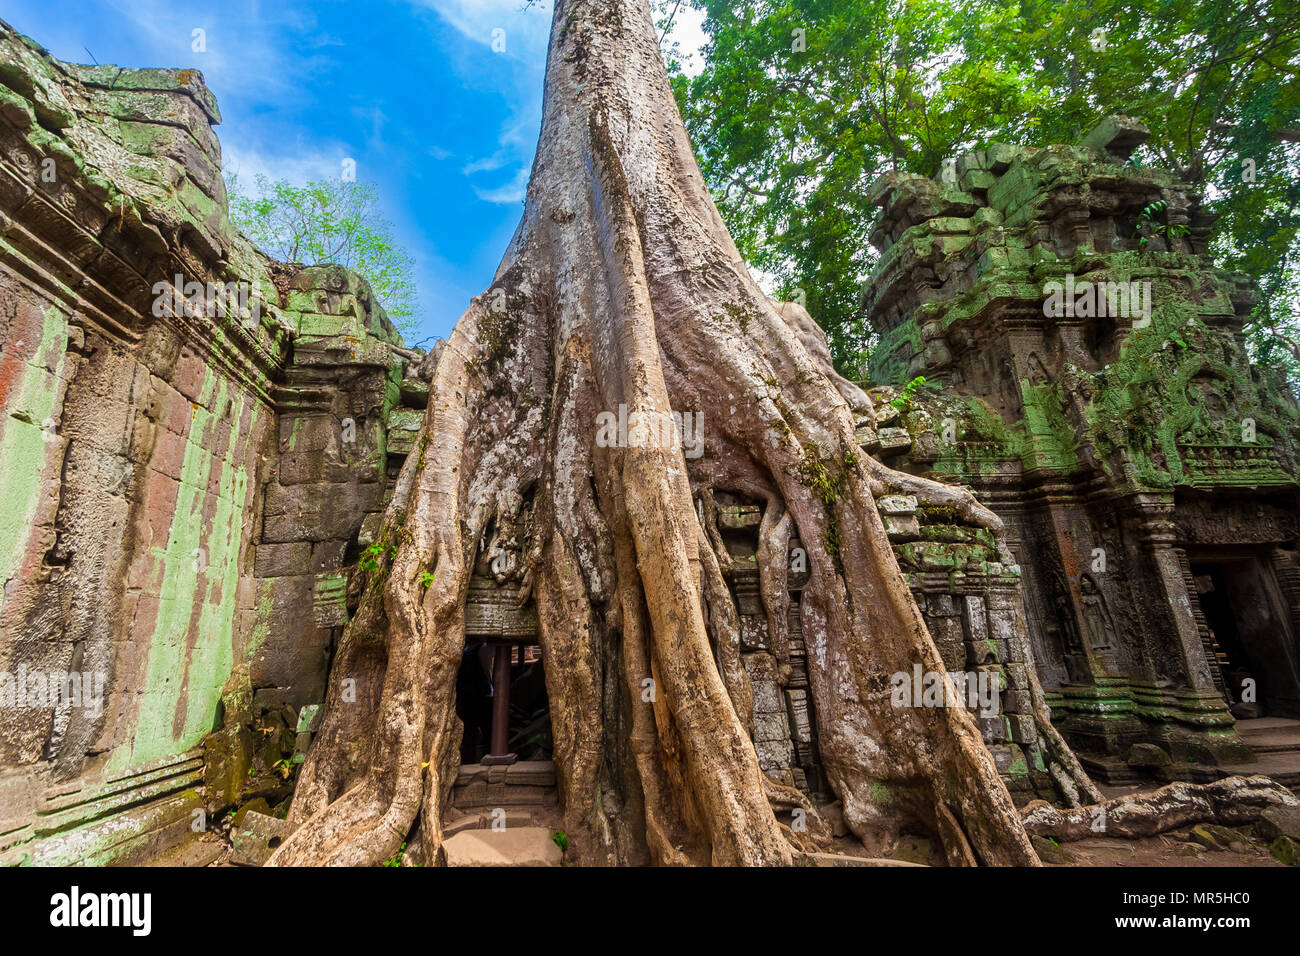 The beautiful and famous Tetrameles tree with its huge devouring roots in the temple ruins of  Ta Prohm (Rajavihara) in Angkor, Siem Reap, Cambodia. Stock Photo